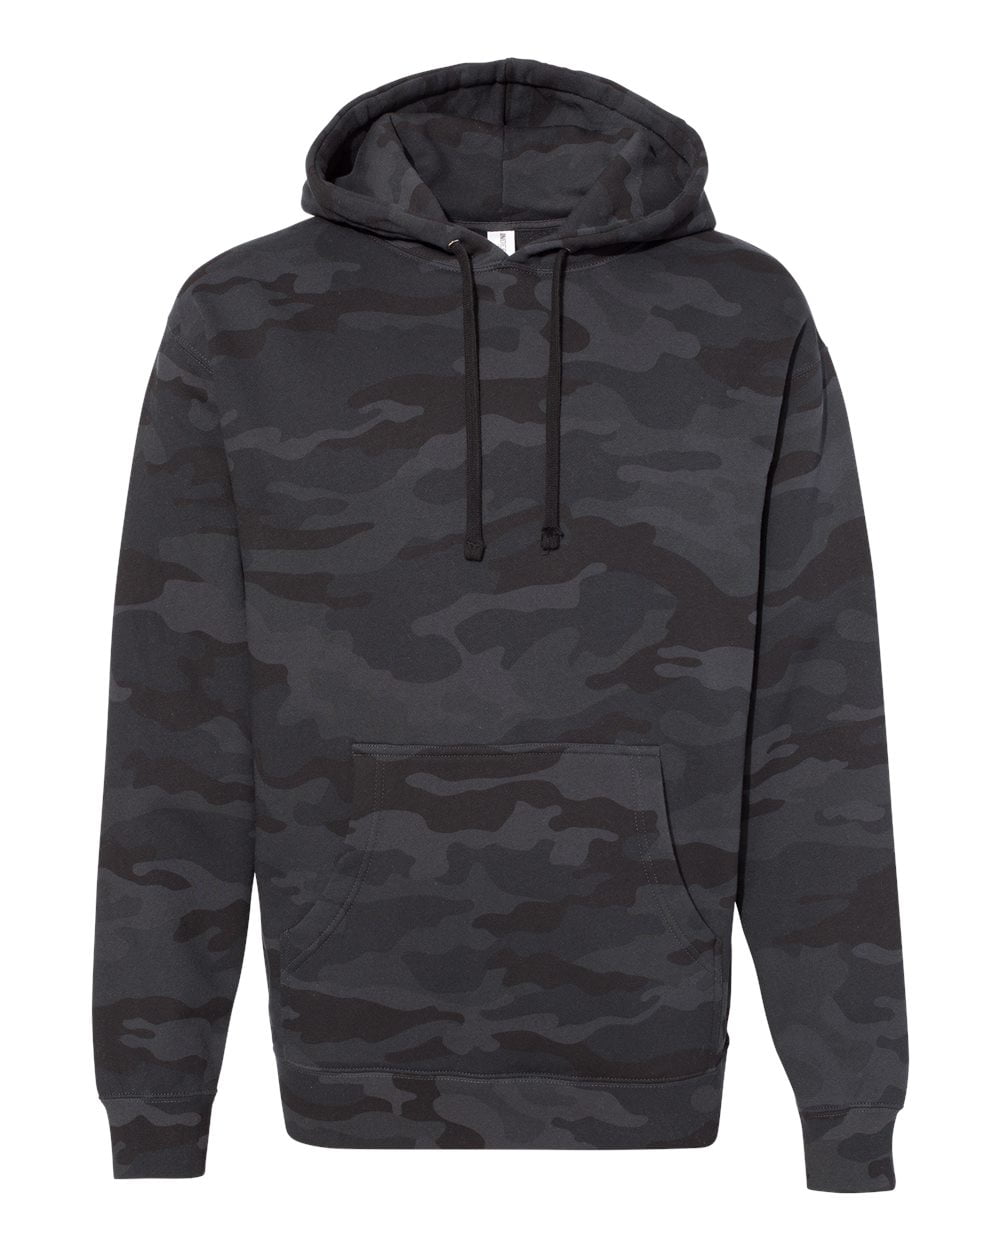 Independent Trading Co. IND4000 Hooded Pullover Sweatshirt - Army Camo - XS